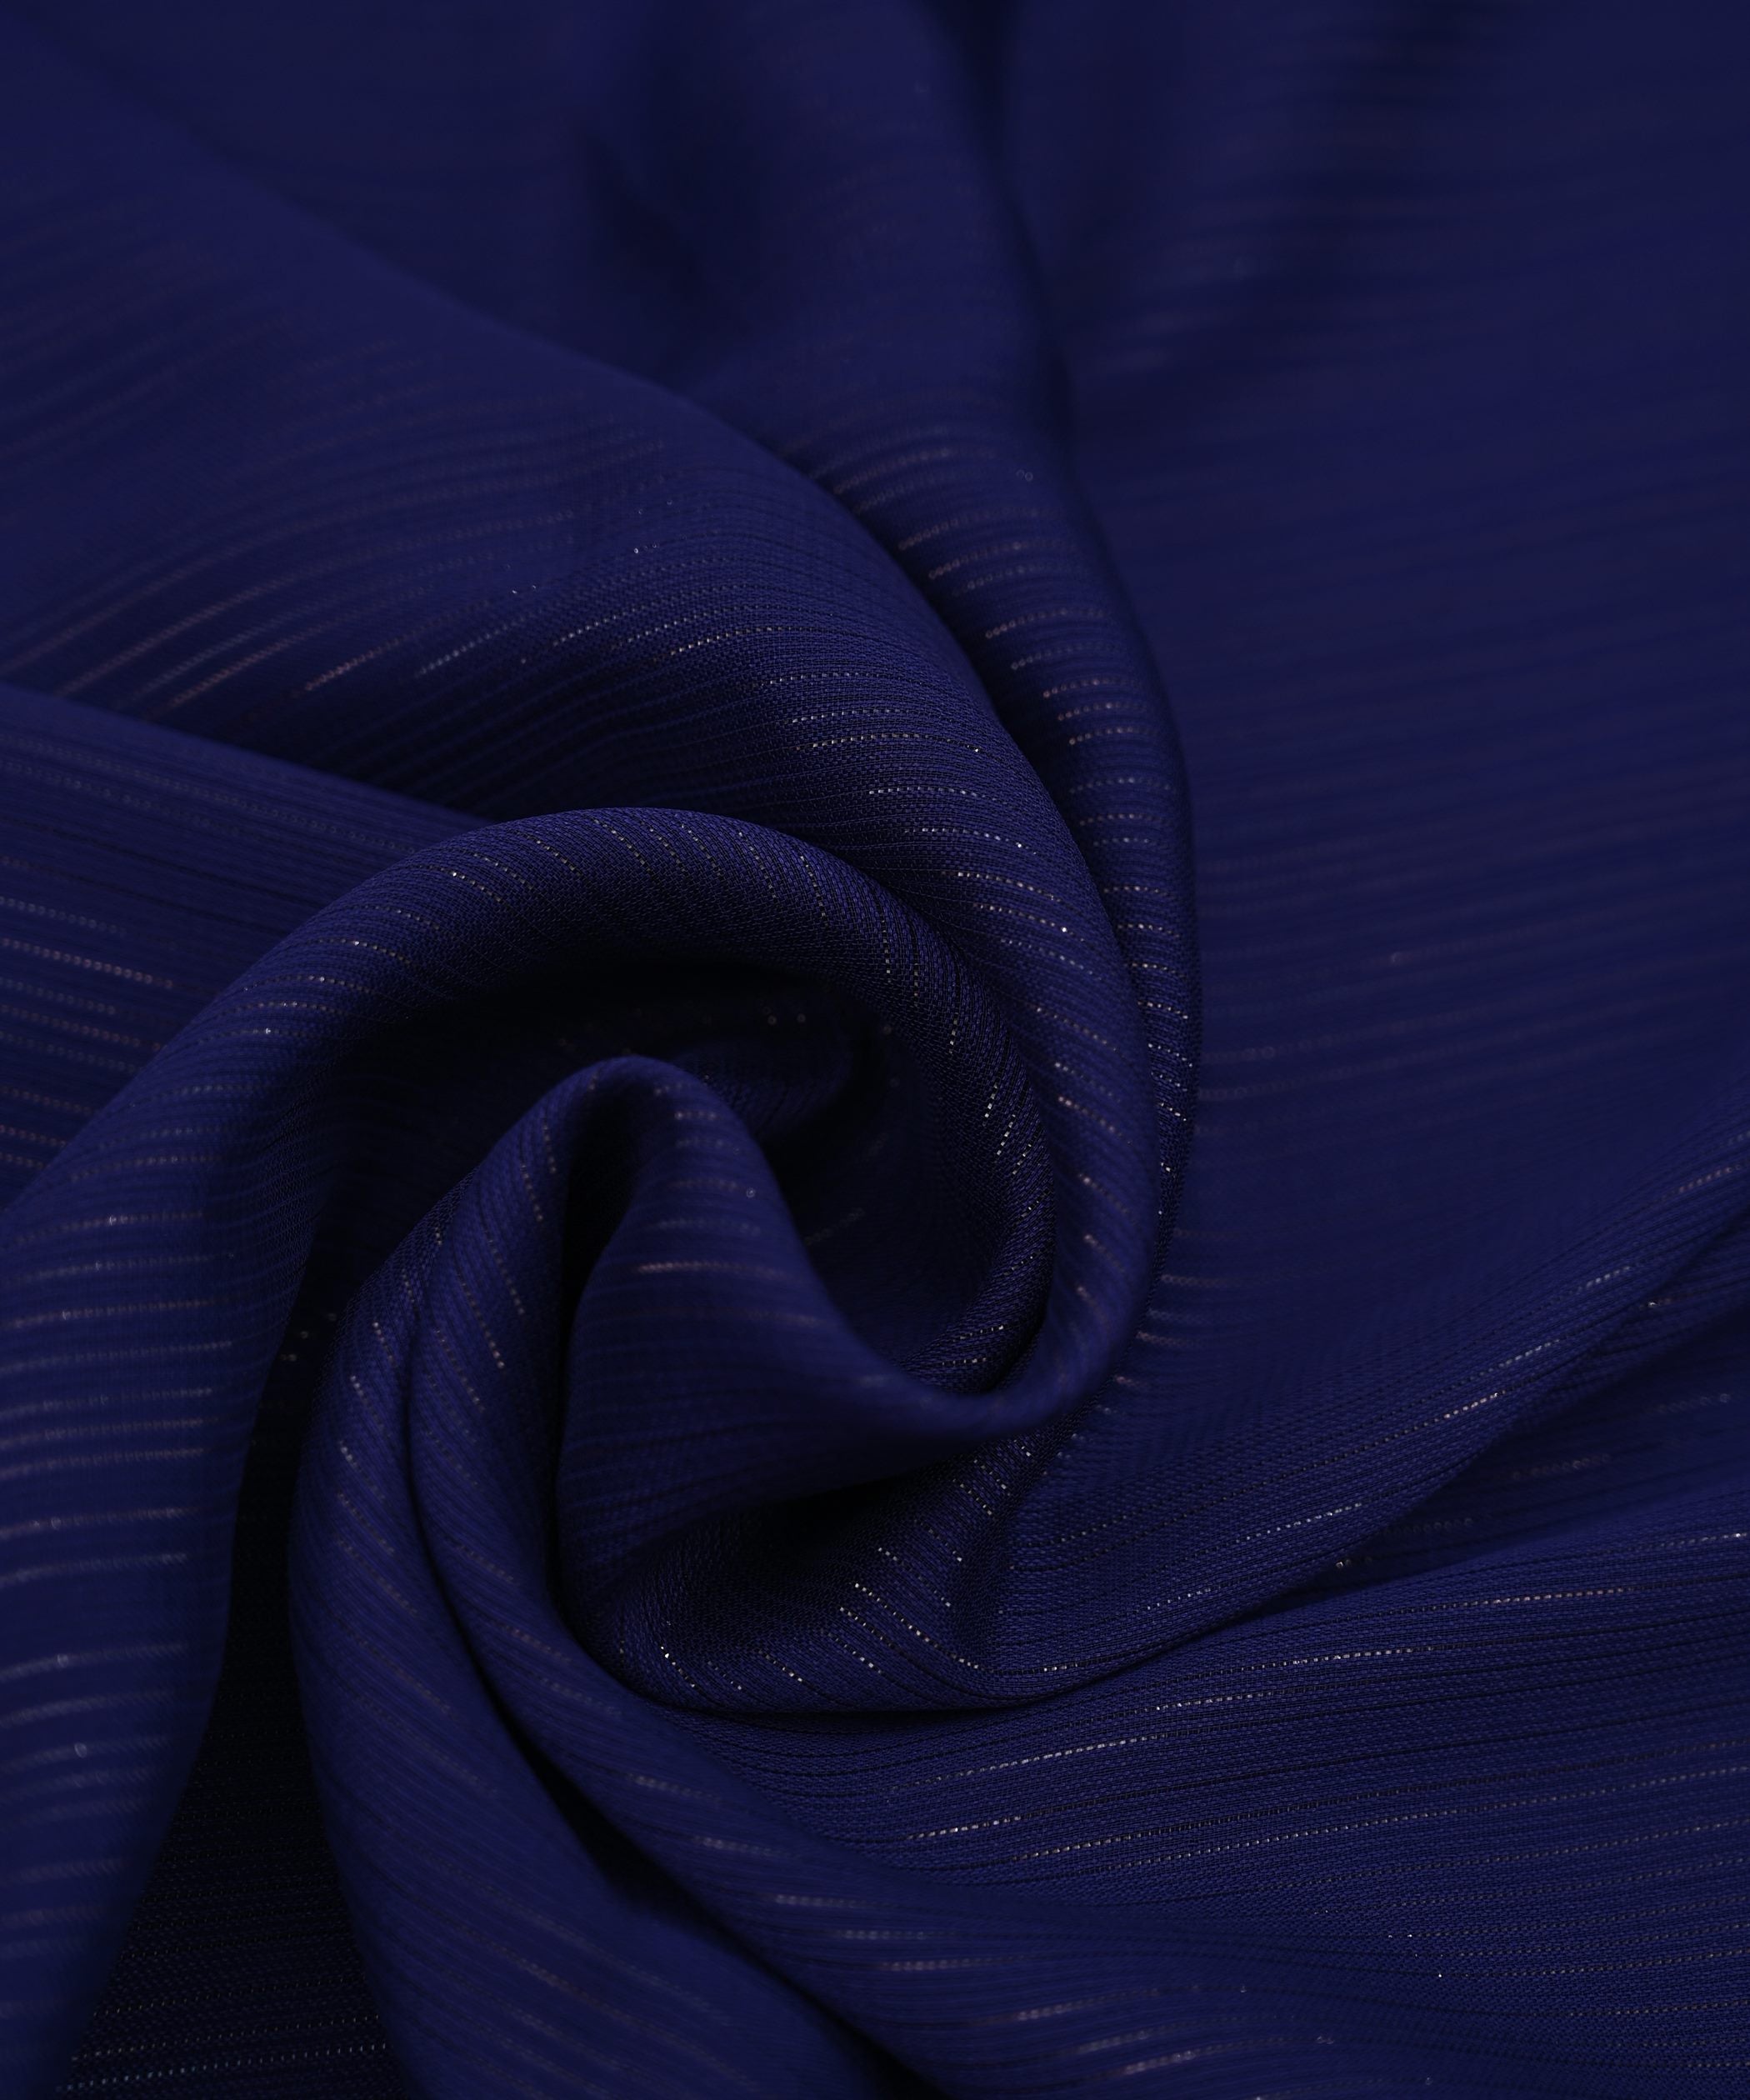 Persian Indigo Georgette Fabric with Stripes